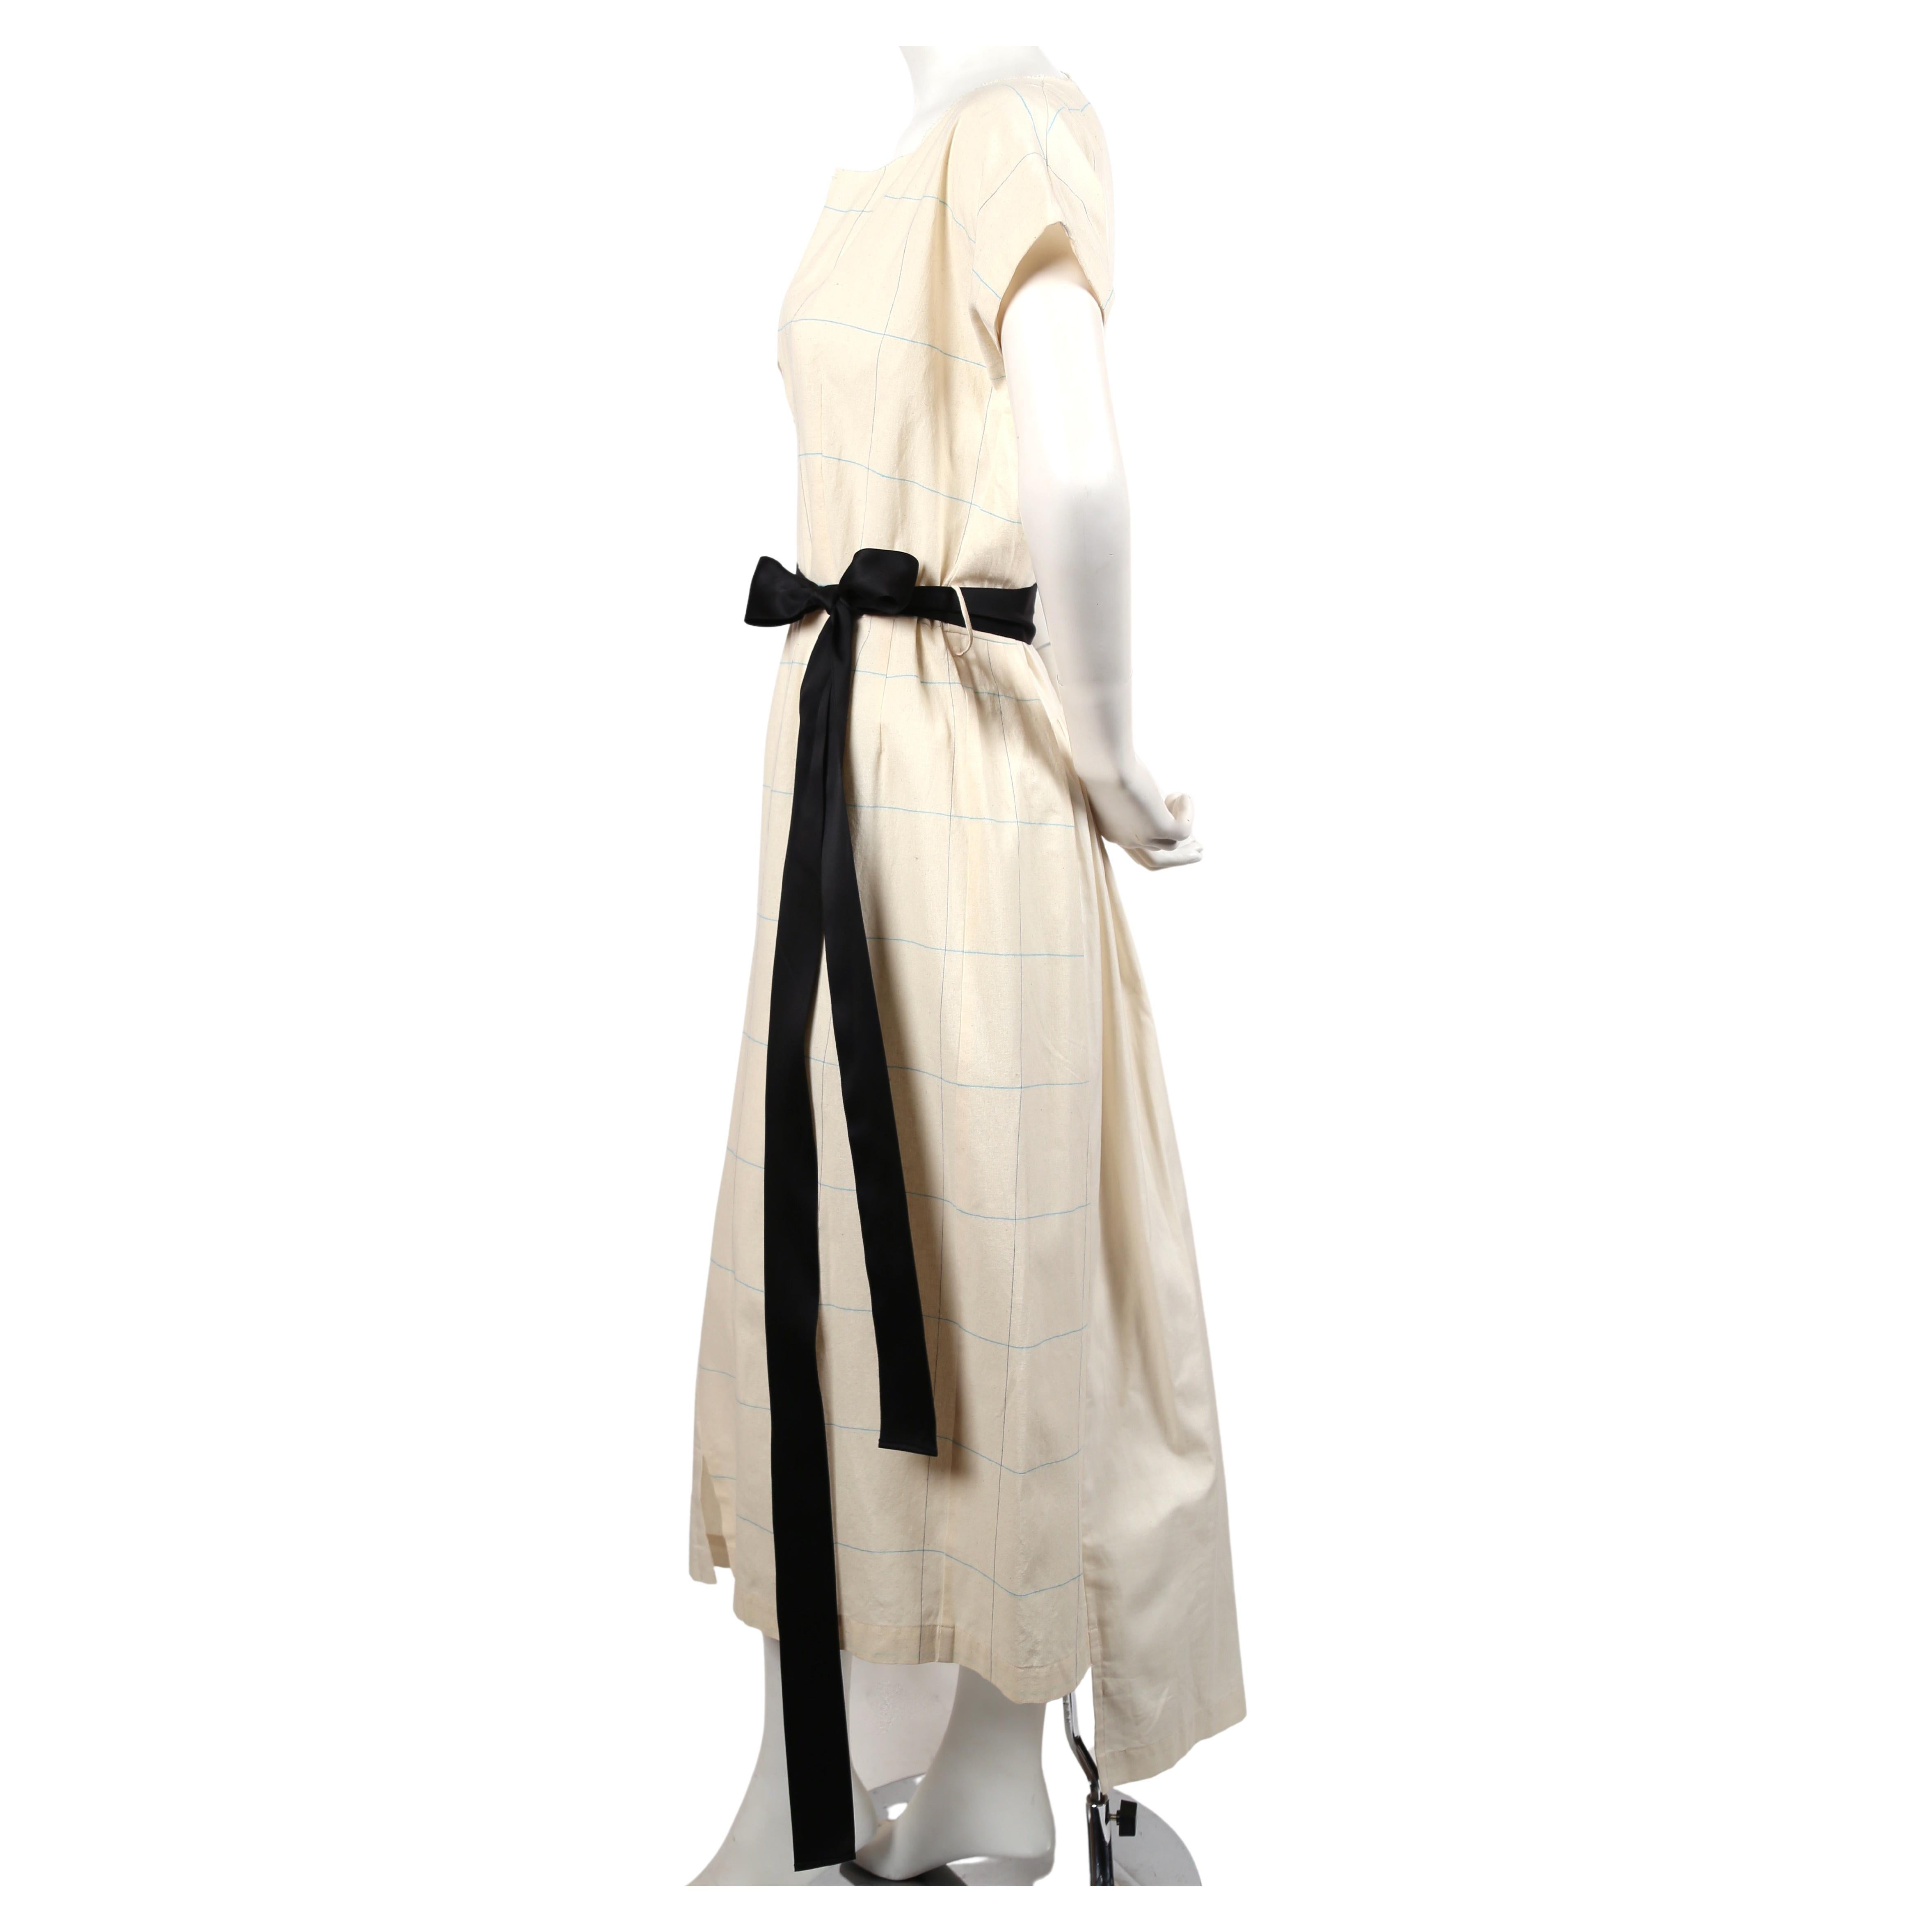 Cream and plaid asymmetrically paneled runway dress with long black tie designed by Rei Kawakubo for Comme Des Garcons exactly as seen on the spring 2002 runway. Raw neckline. Japan size M. Approximate measurements: 34